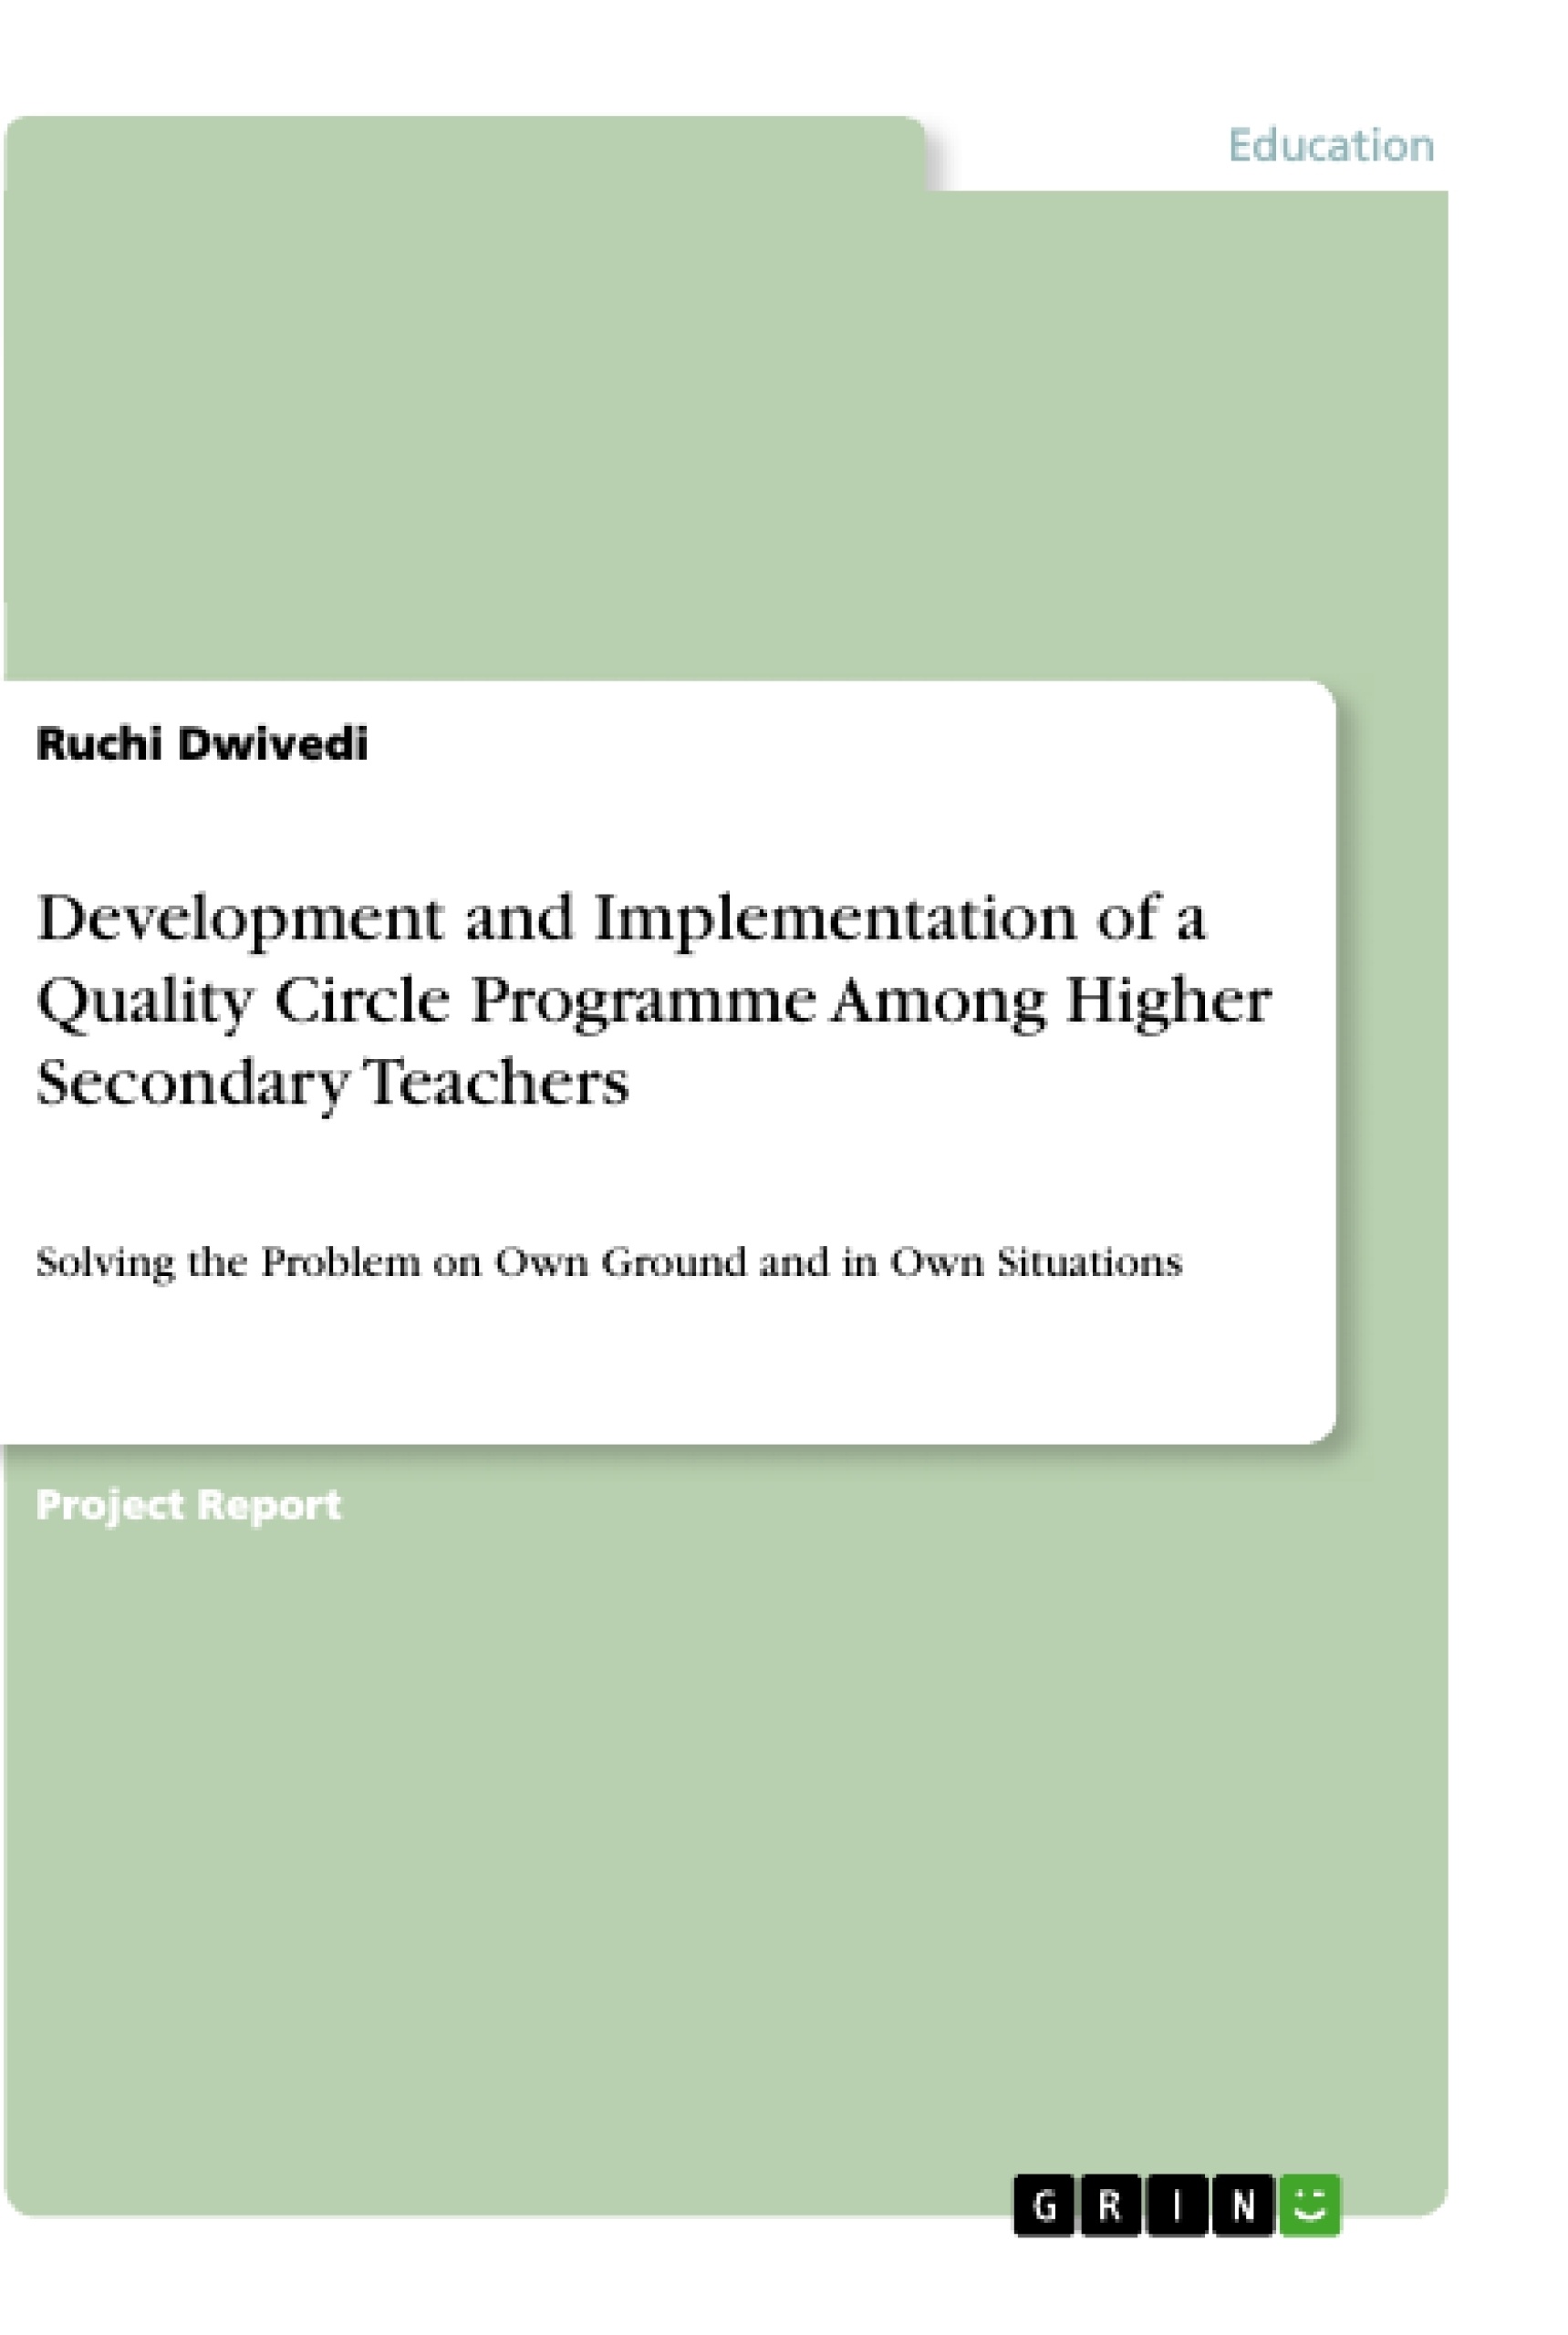 Título: Development and Implementation of a Quality Circle Programme Among Higher Secondary Teachers